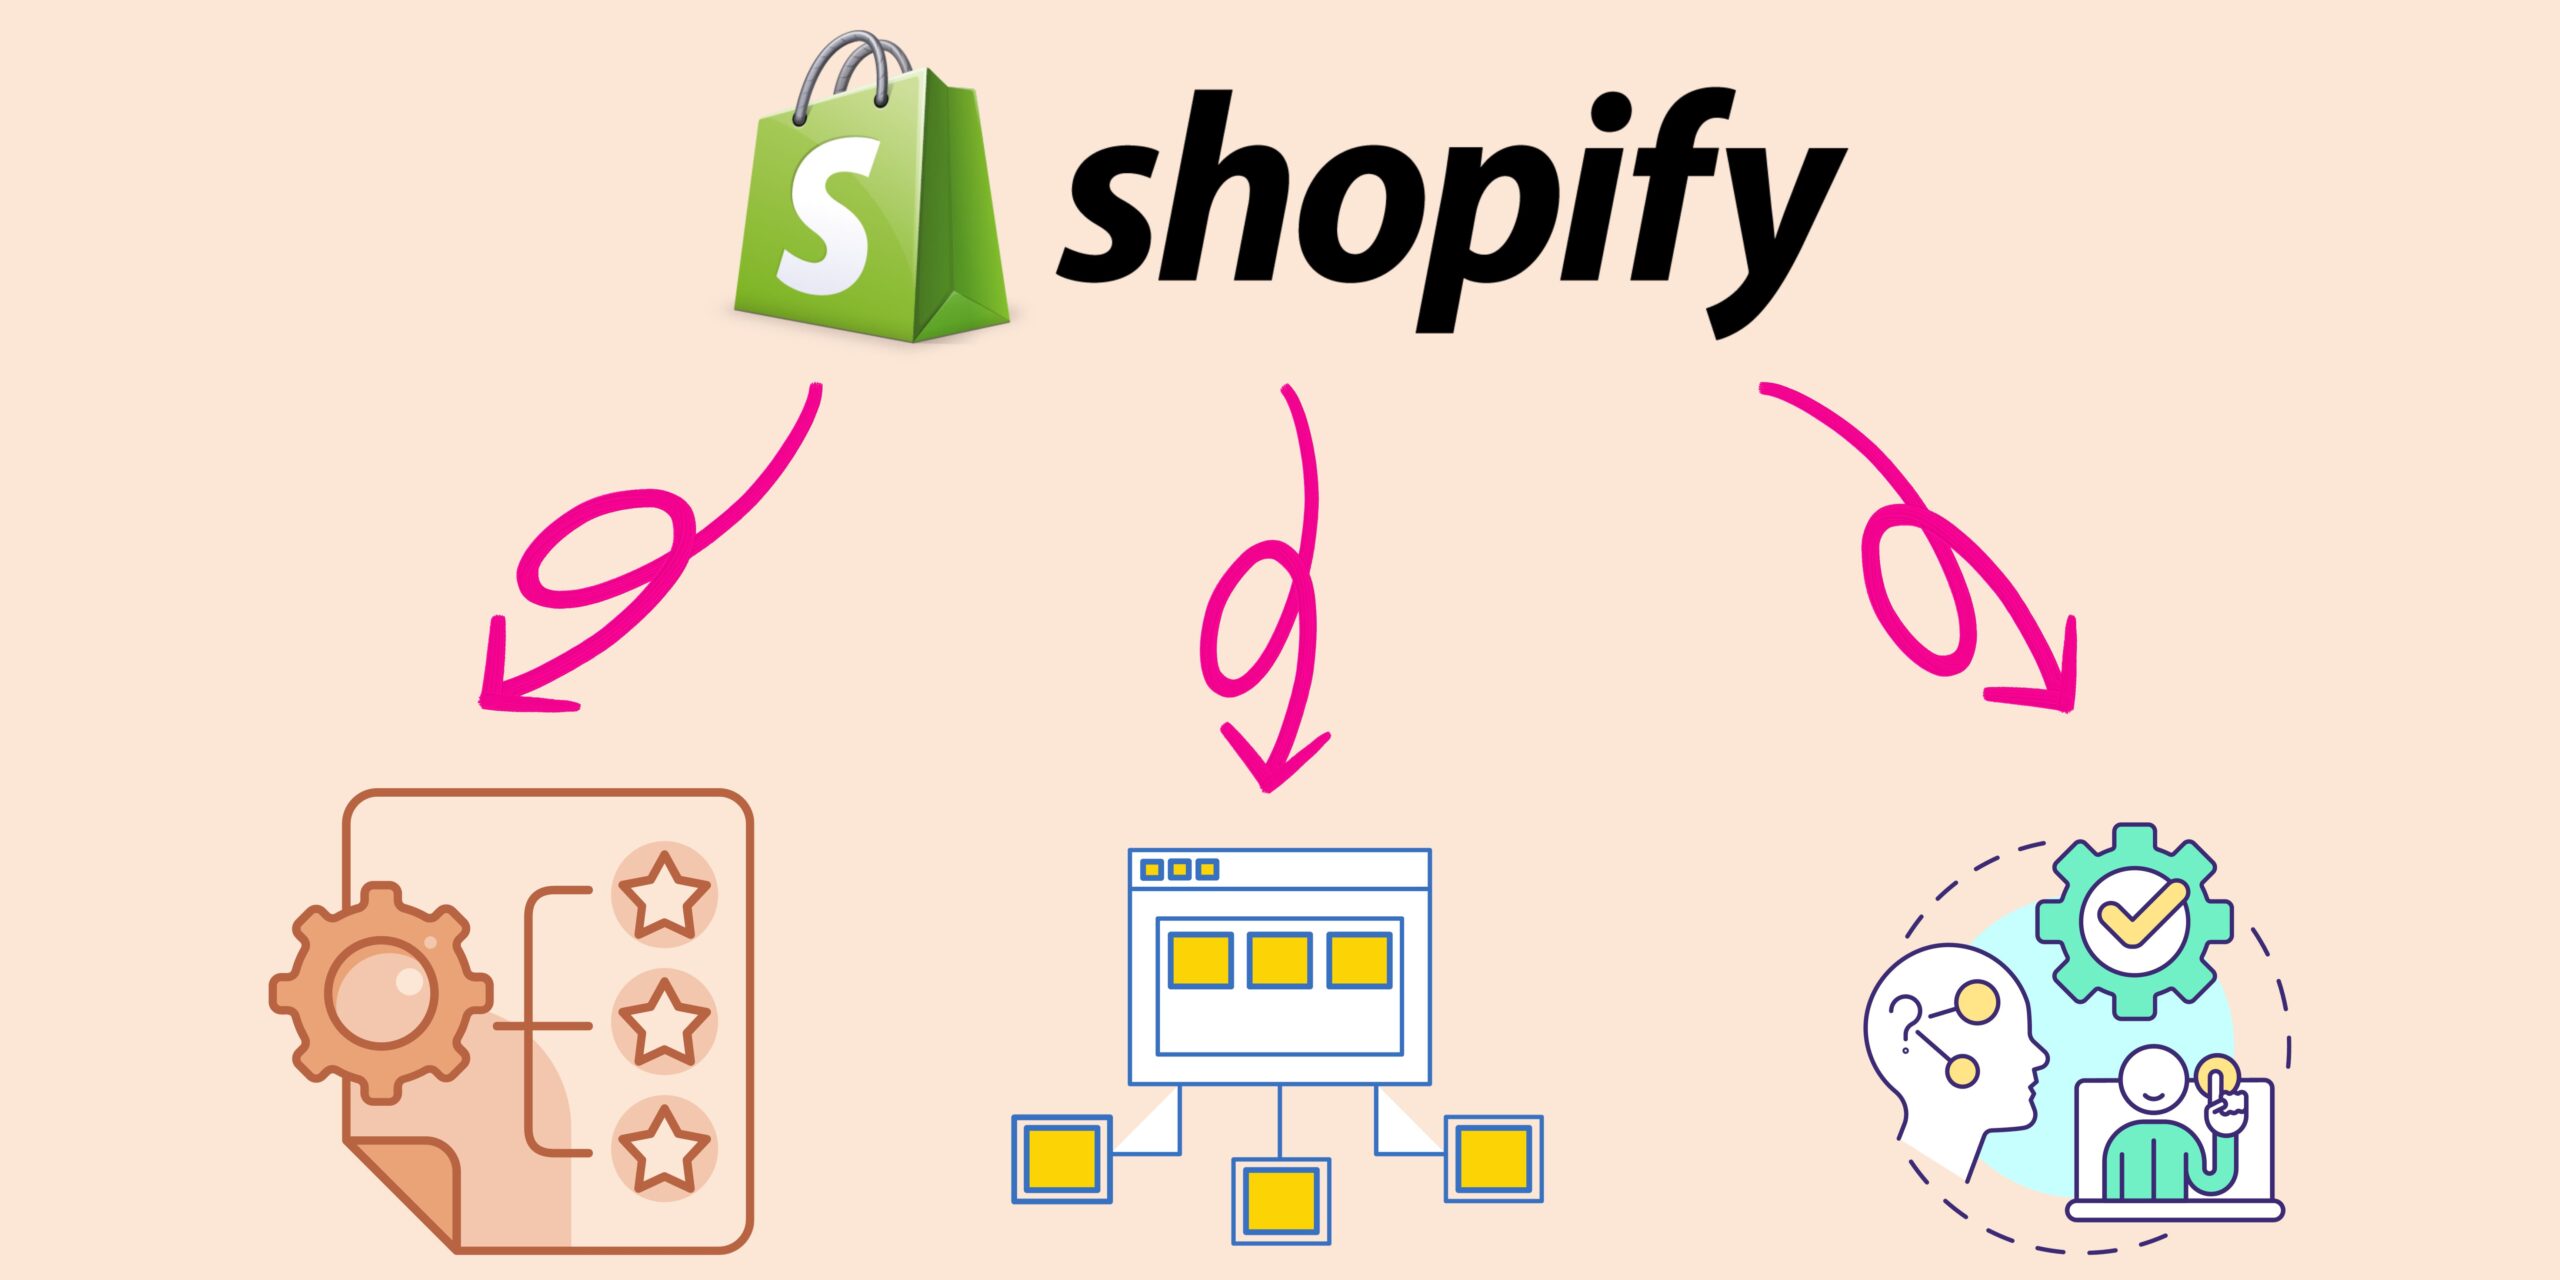 Why Does Shopify Stand Out?